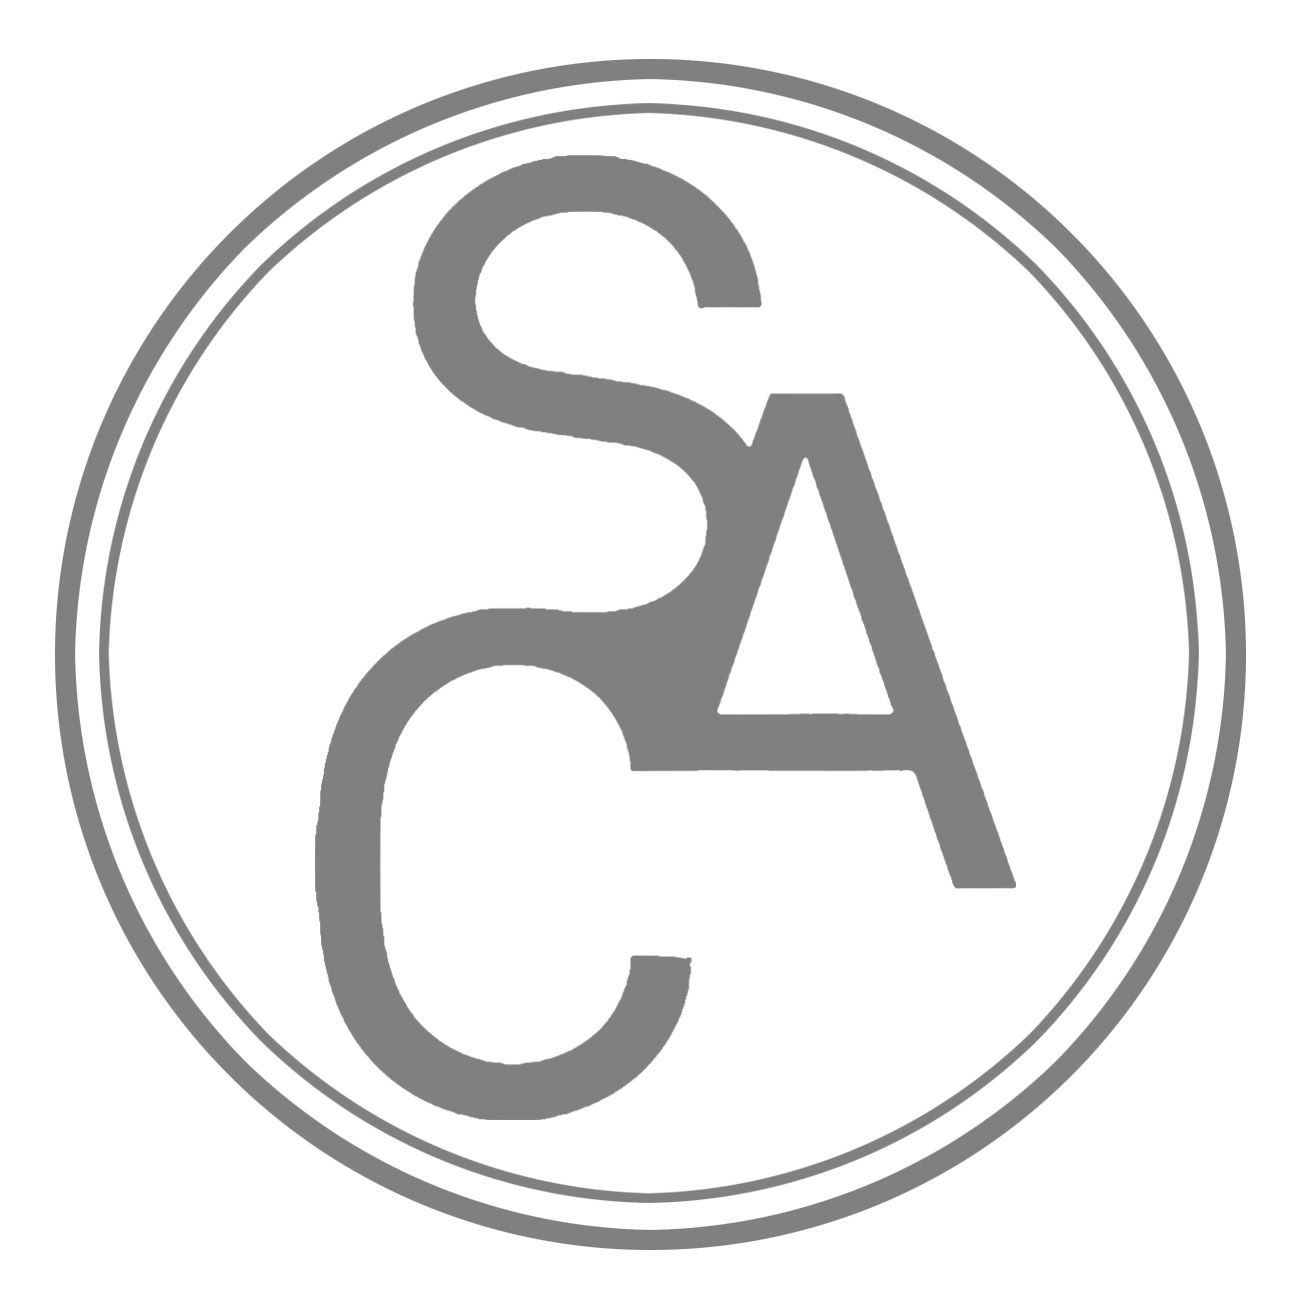 SAC (Architect & Engineers)|Architect|Professional Services